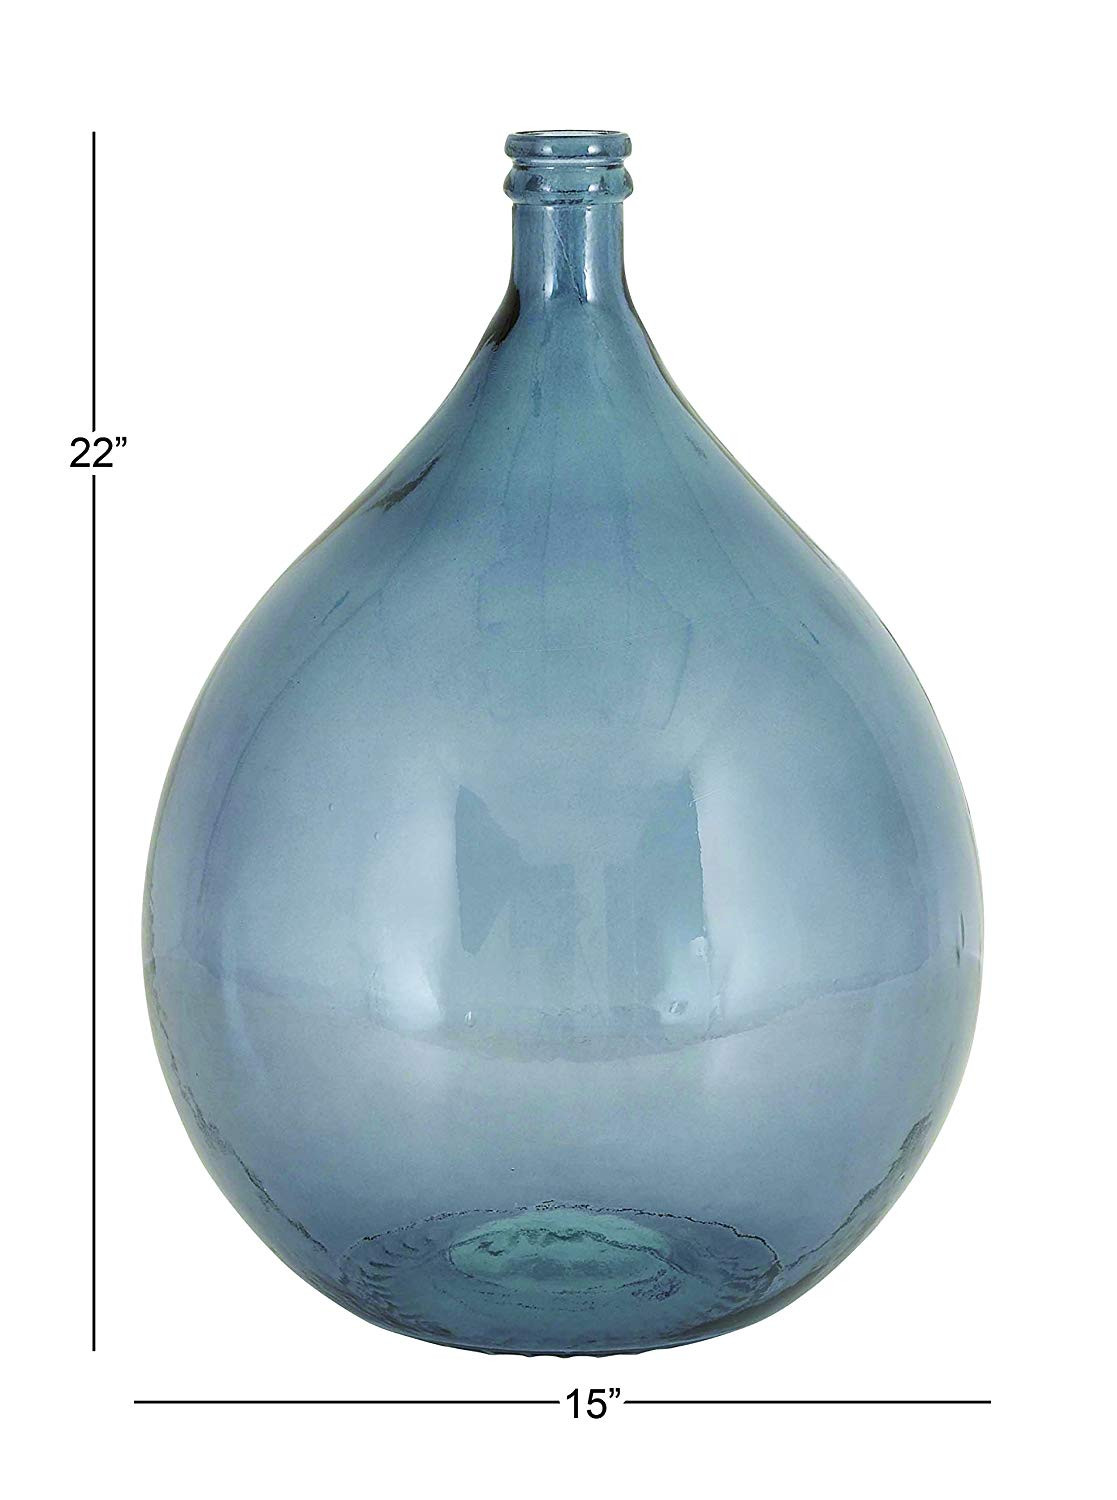 18 Lovely Blue Recycled Glass Vase 2024 free download blue recycled glass vase of amazon com deco 79 glass vase 15 by 22 inch grey home kitchen regarding 81od81idsnl sl1500